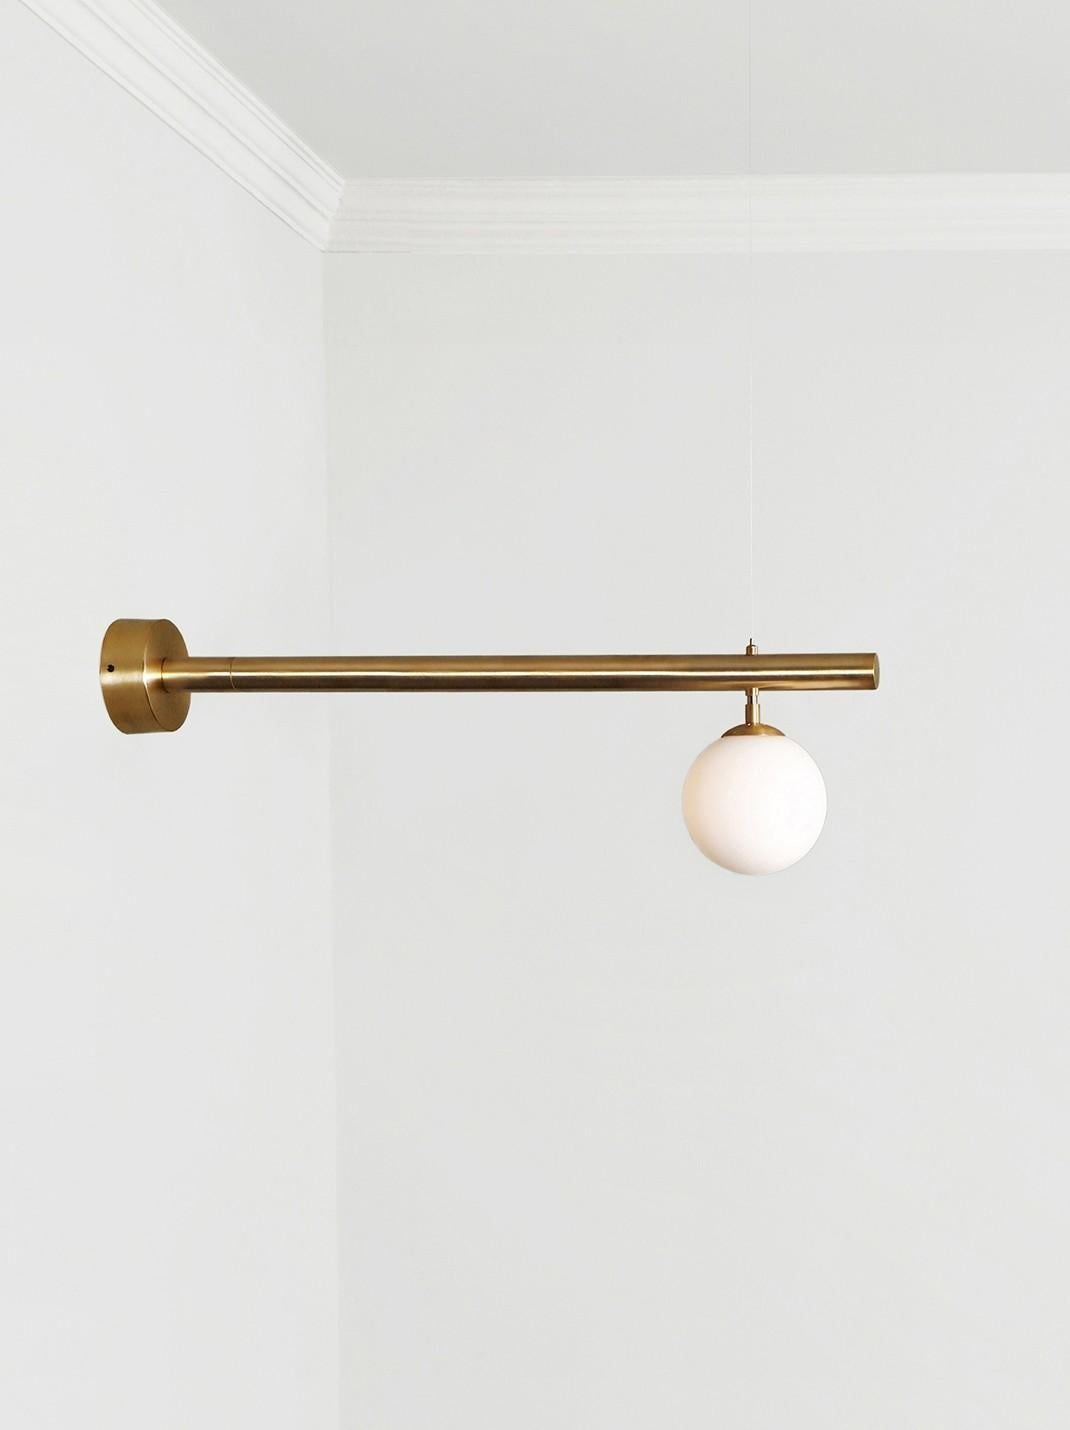 Satellite sconce by Paul Matter
Dimensions: W 94 x D 15 x H 27 cm
Materials: Brass.
Available in different finishes.

Satellite is inspired by the conceptual and minimalist movement of the 1960s and 1970s. These light sculptures are